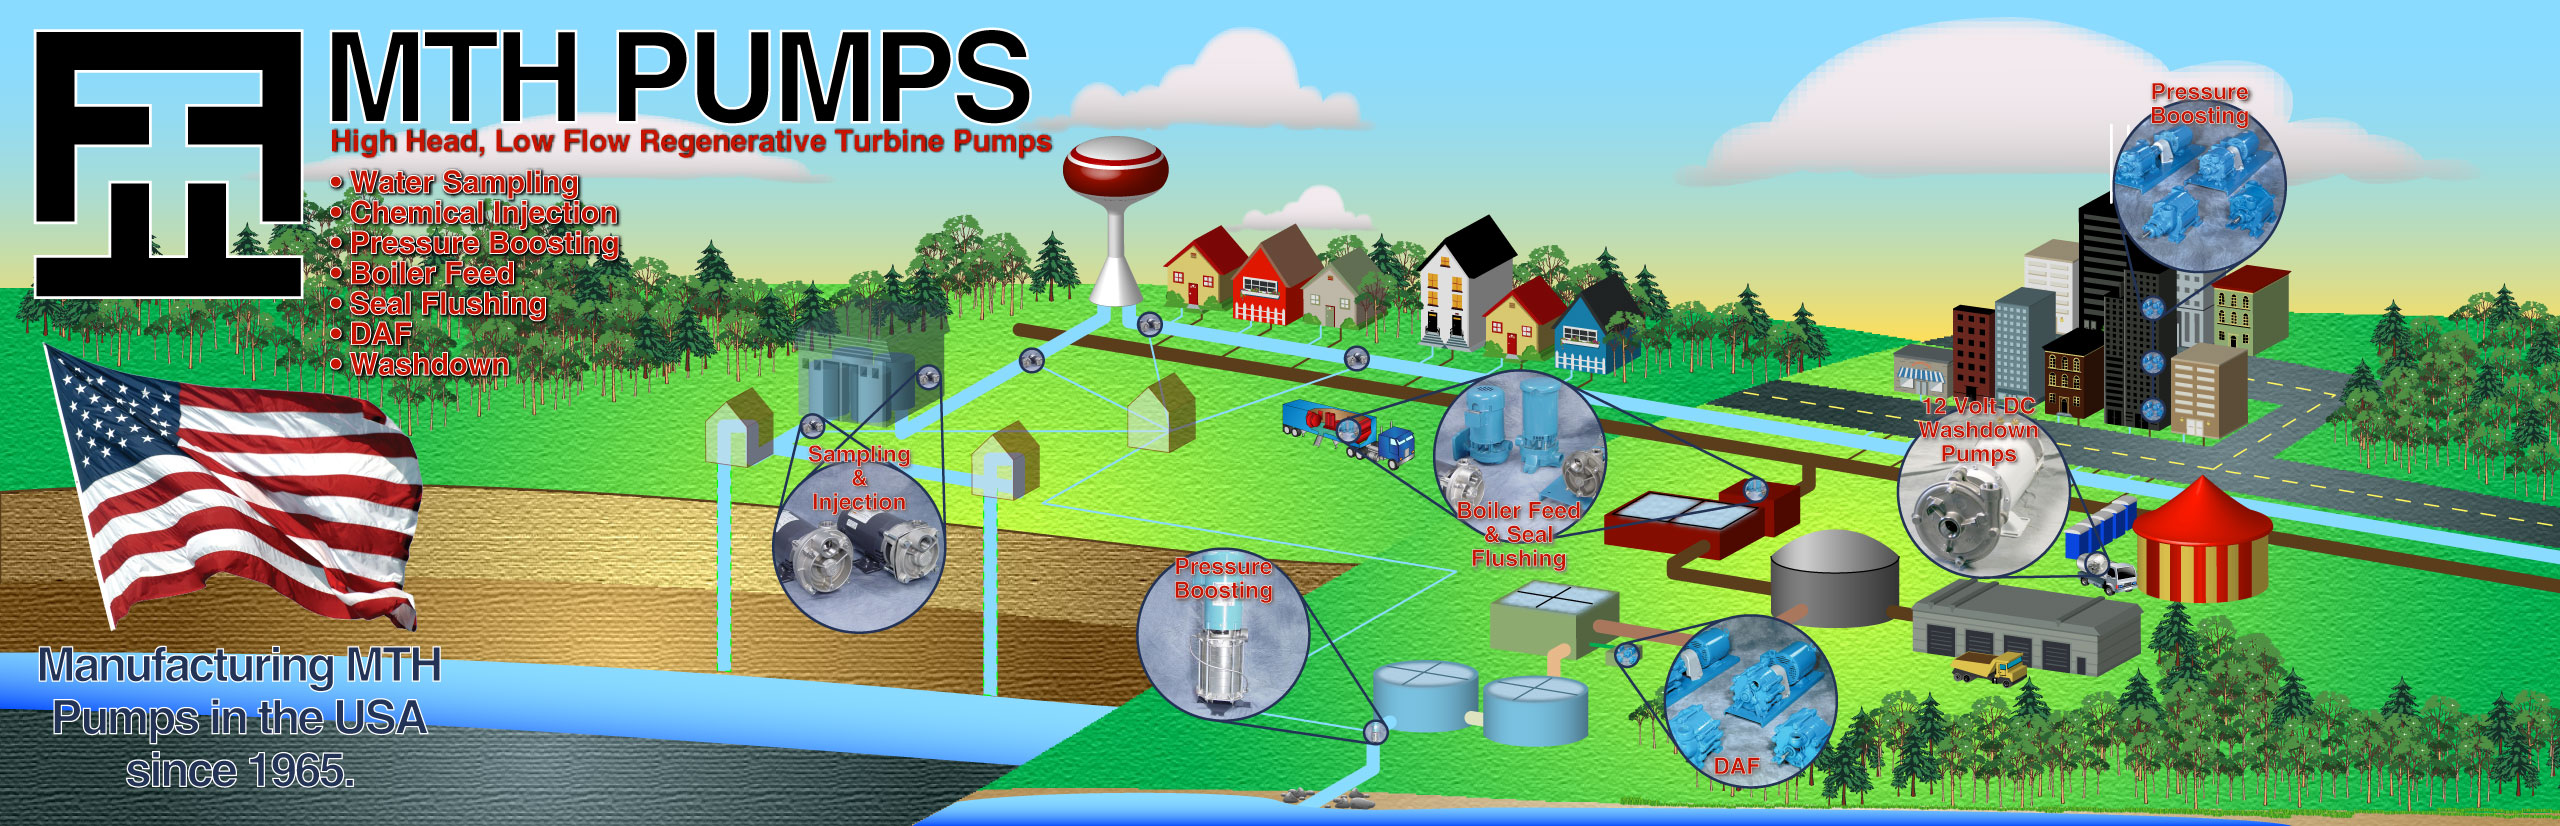 MTH Pumps Municipal and Wastewater Applications